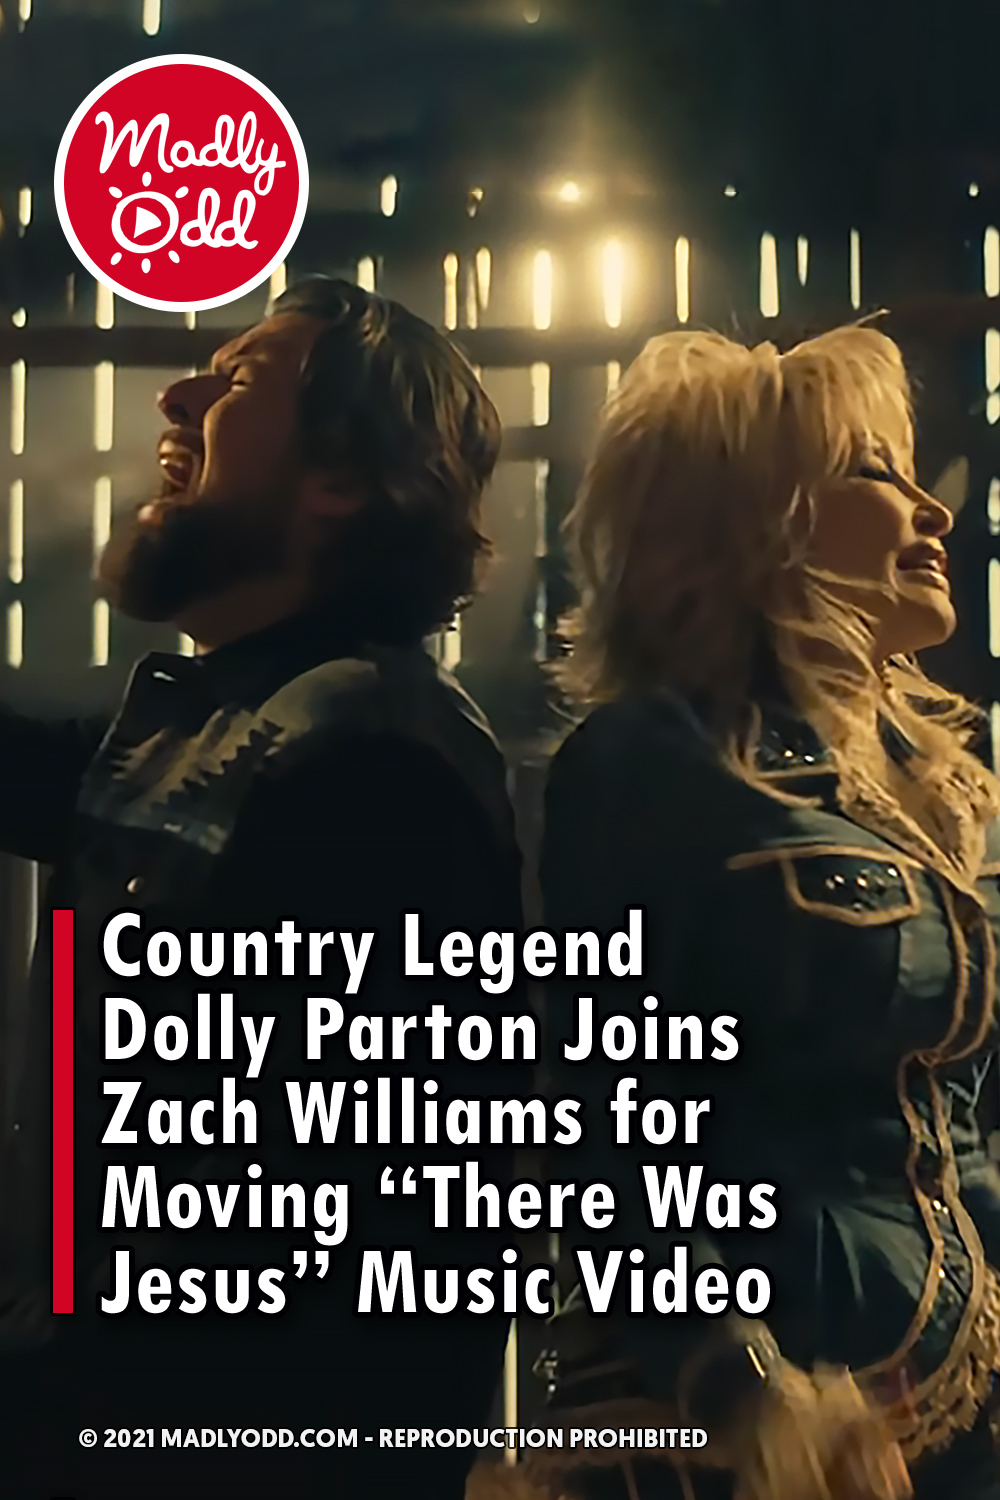 Country Legend Dolly Parton Joins Zach Williams for Moving “There Was Jesus” Music Video